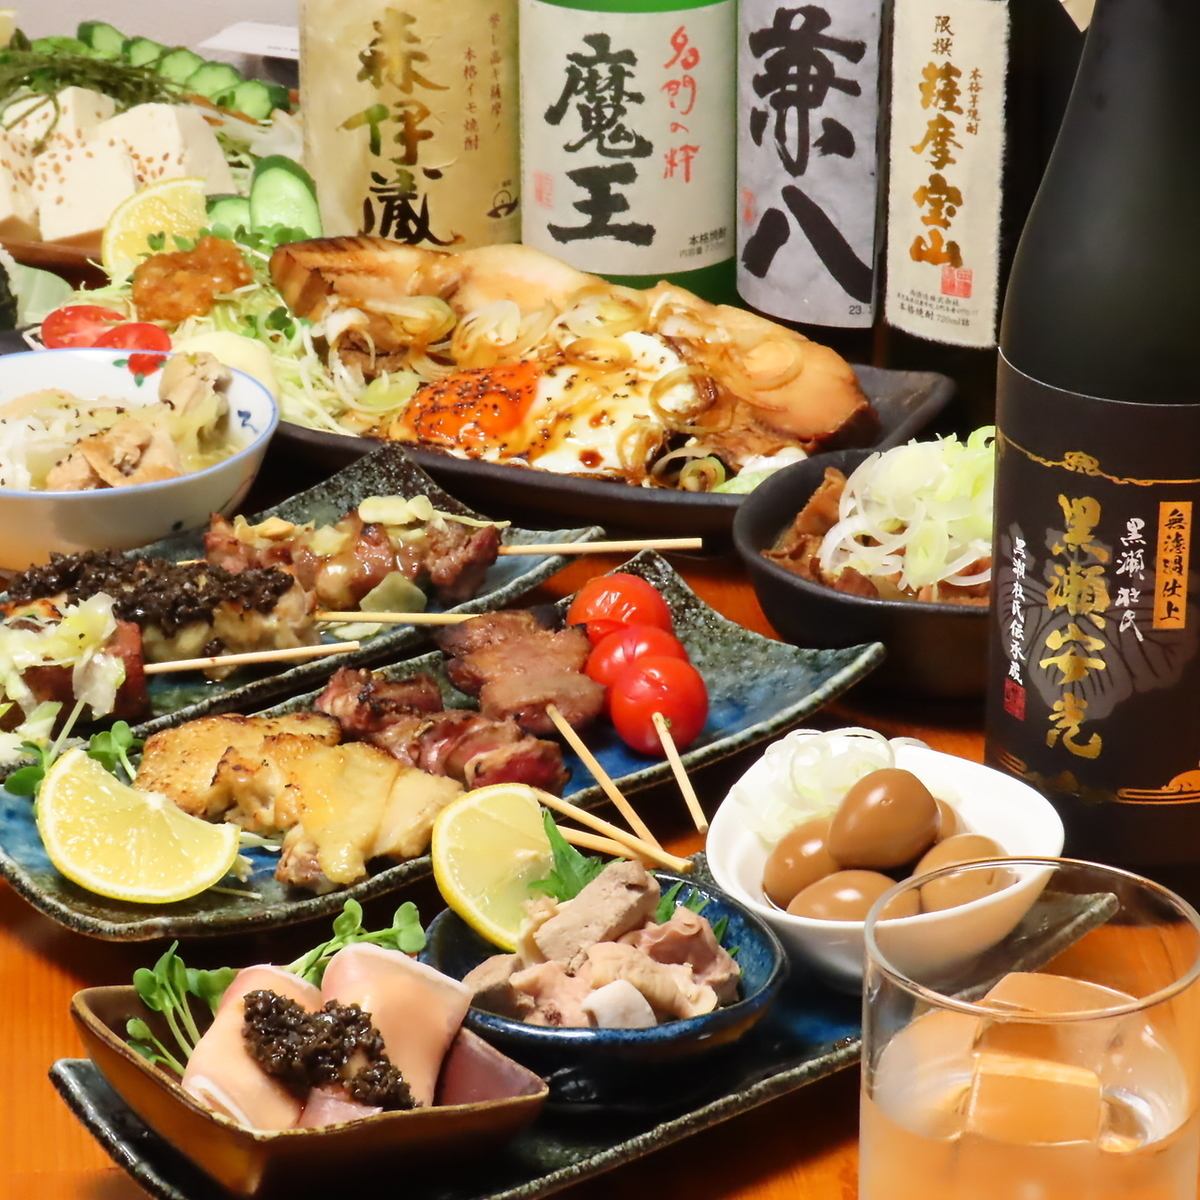 Enjoy a wide variety of shochu and fresh skewers in a homely space♪